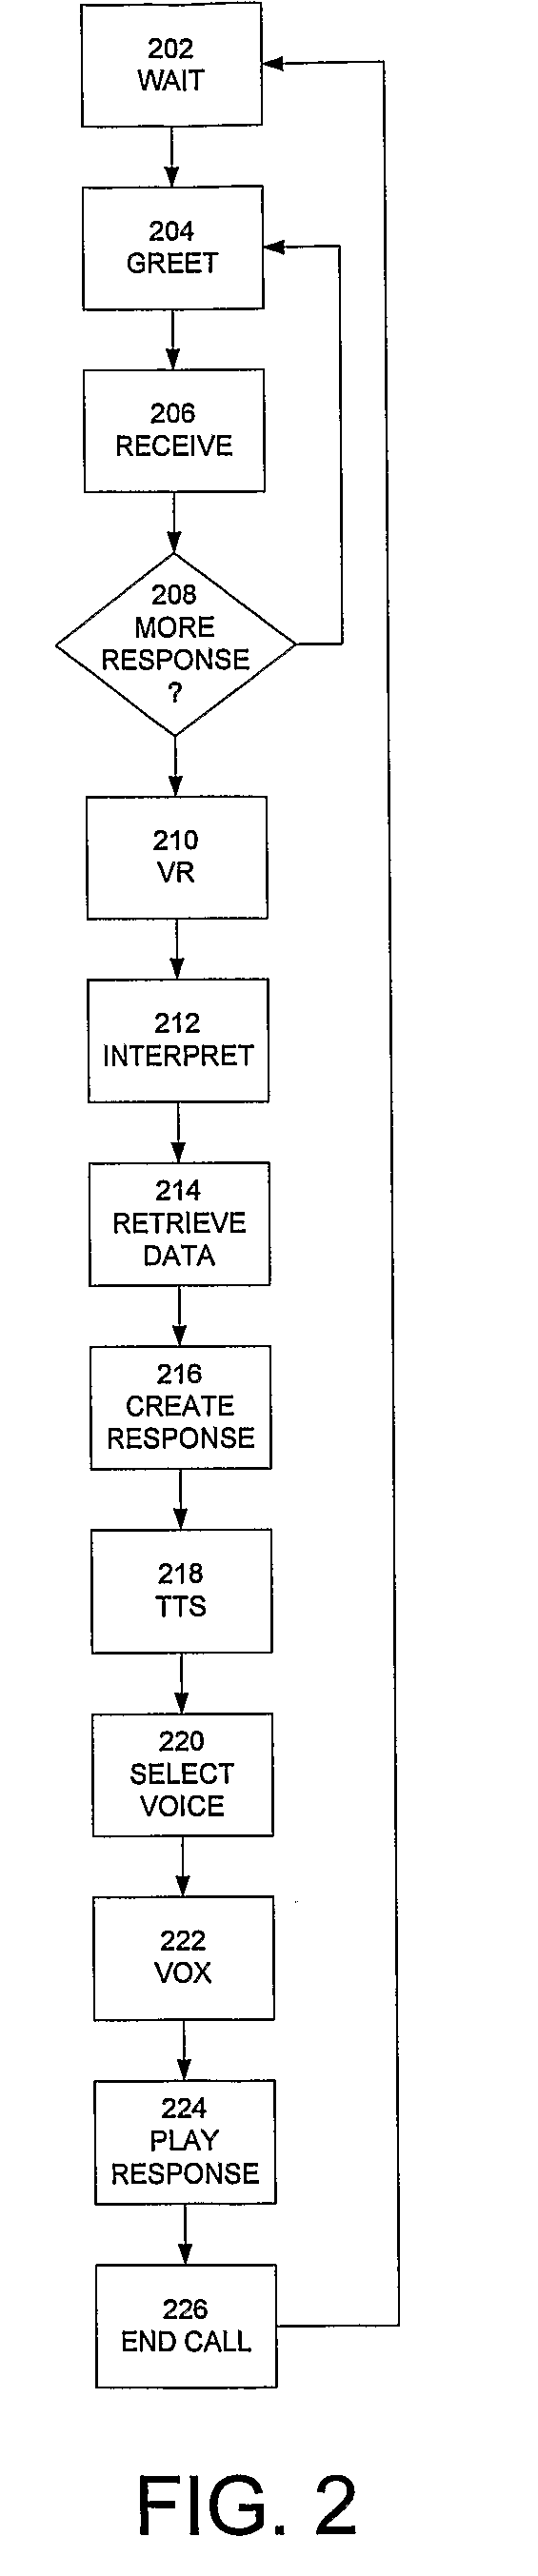 System and Method for a Telephone Feedback System for Fitness Programs